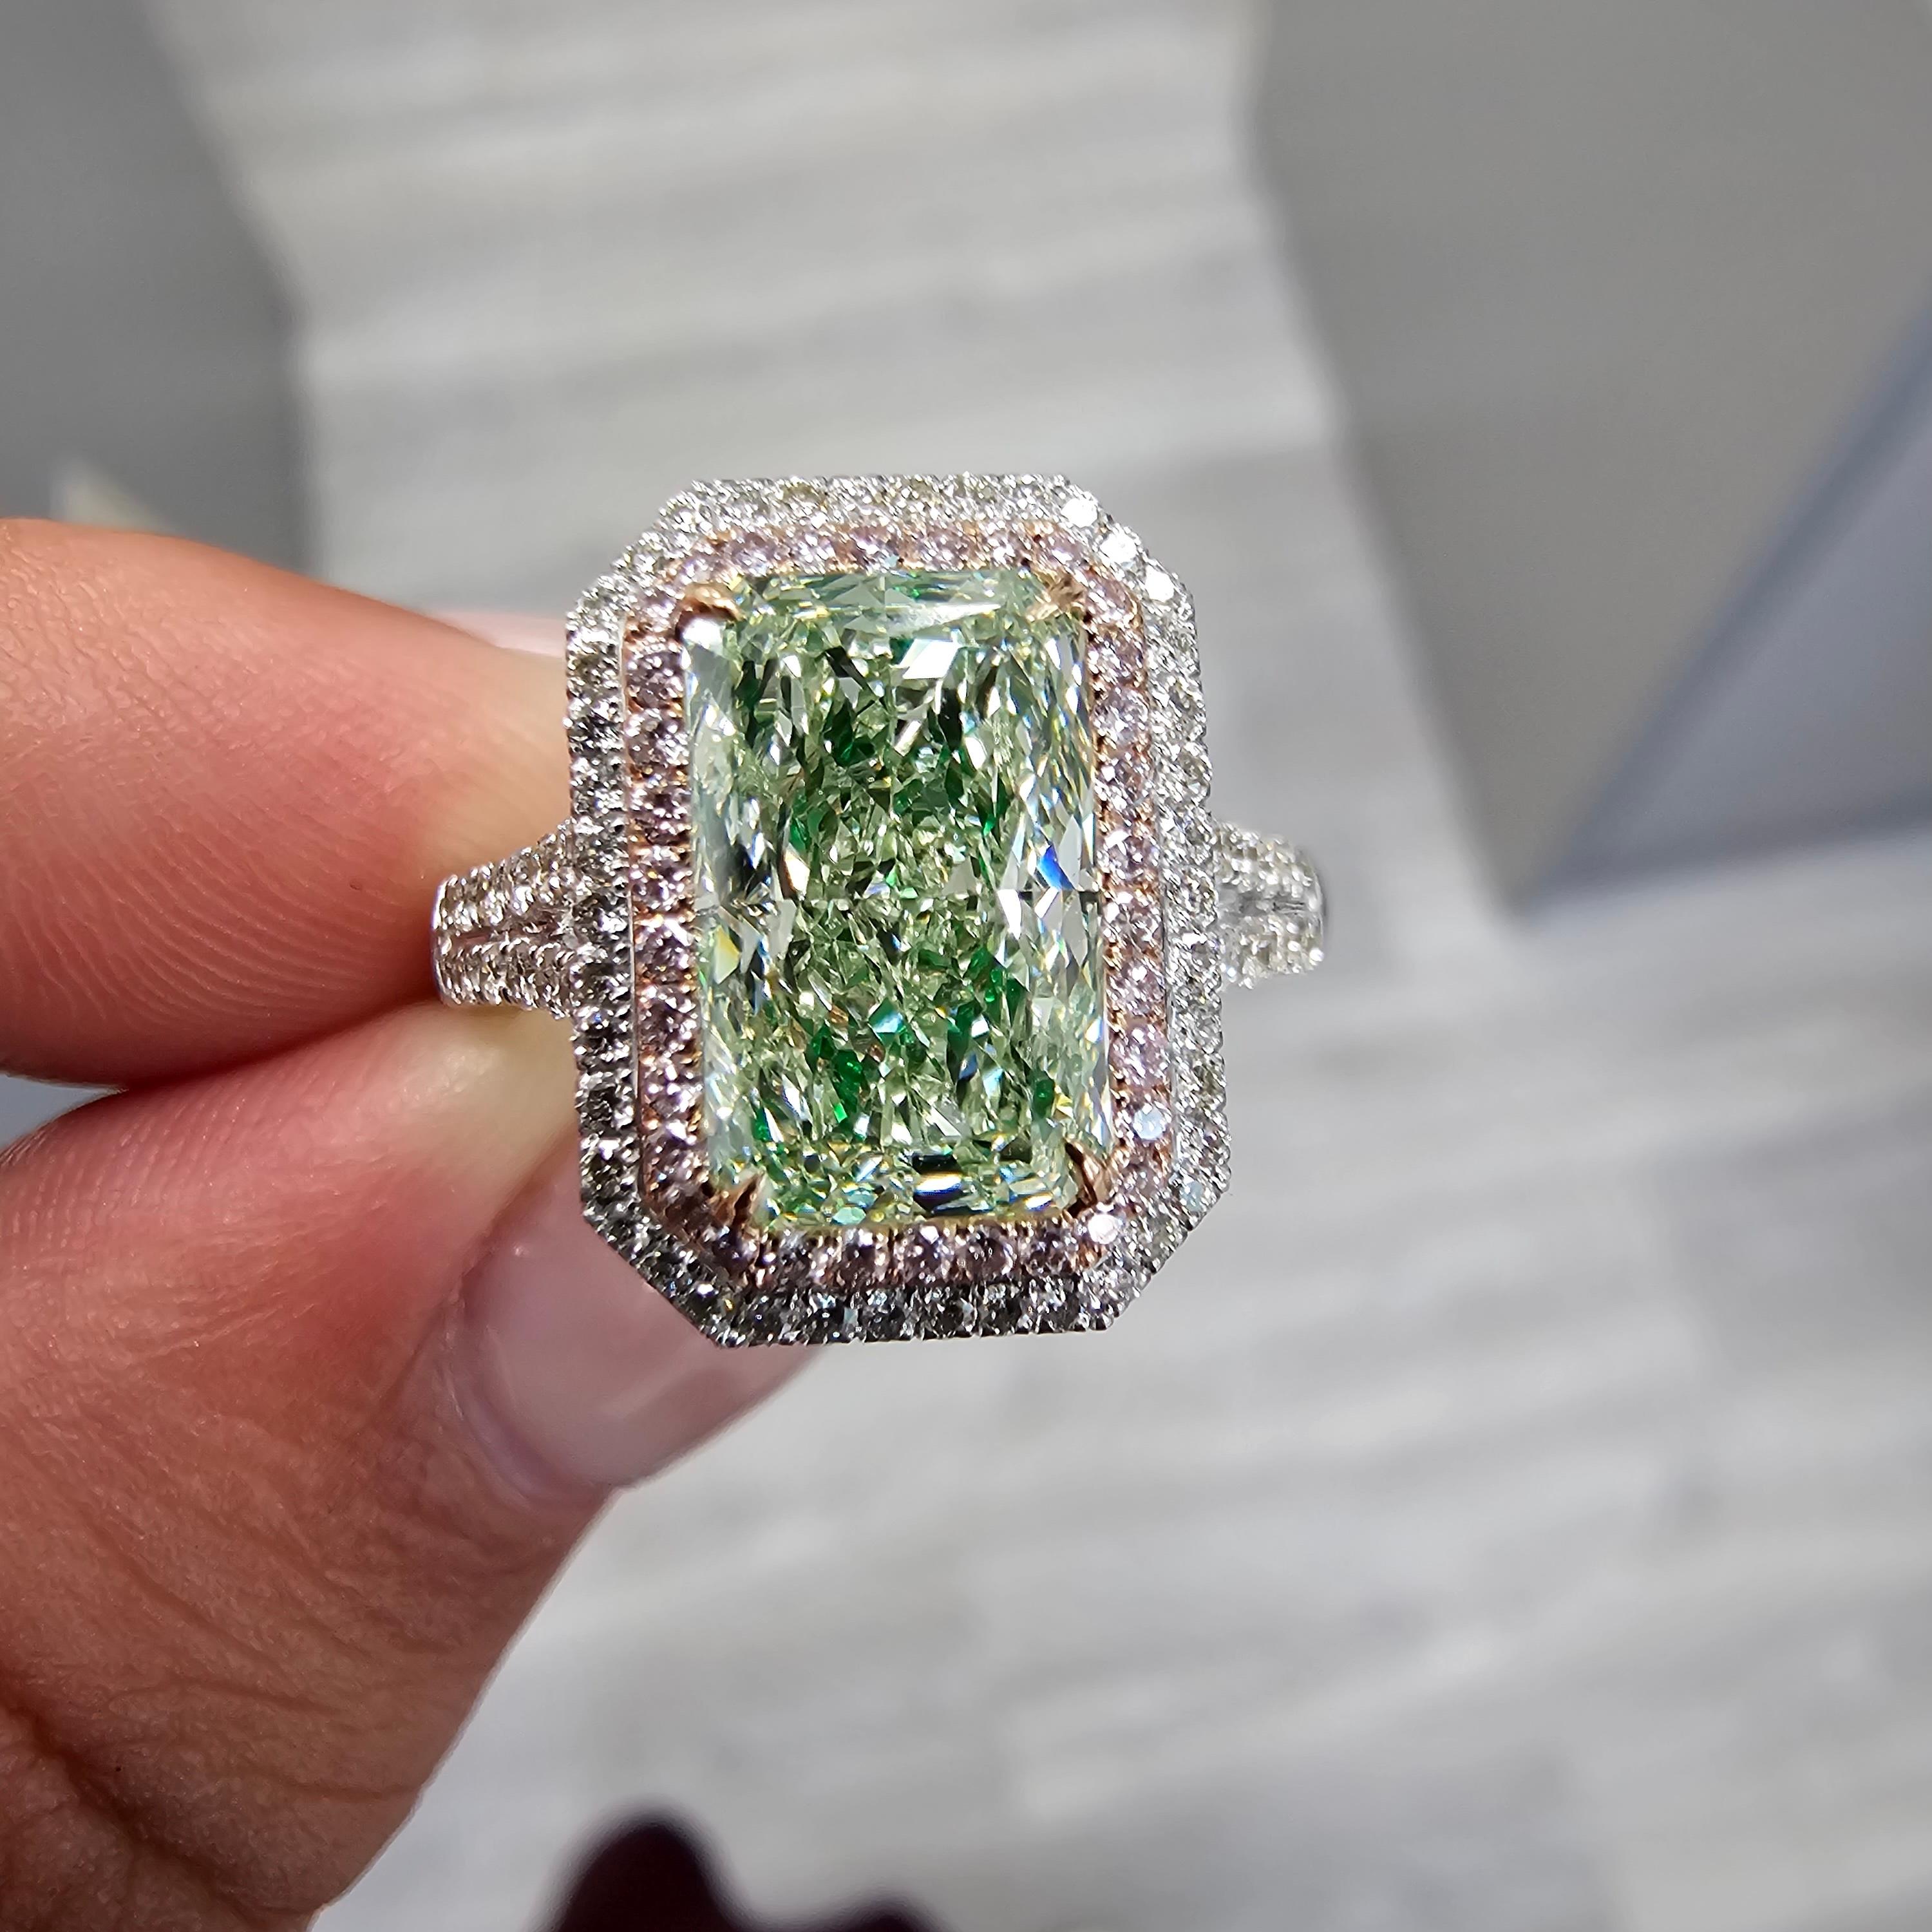 An absolutely killer ring, with an uber elongated radiant cut green diamond that’s cut to perfection.

No spots of color loss, amazing life, and the spread of a 4 Carat diamond!

Excellent and Good Cutting with VS2 Clarity 

Light and sweet lime